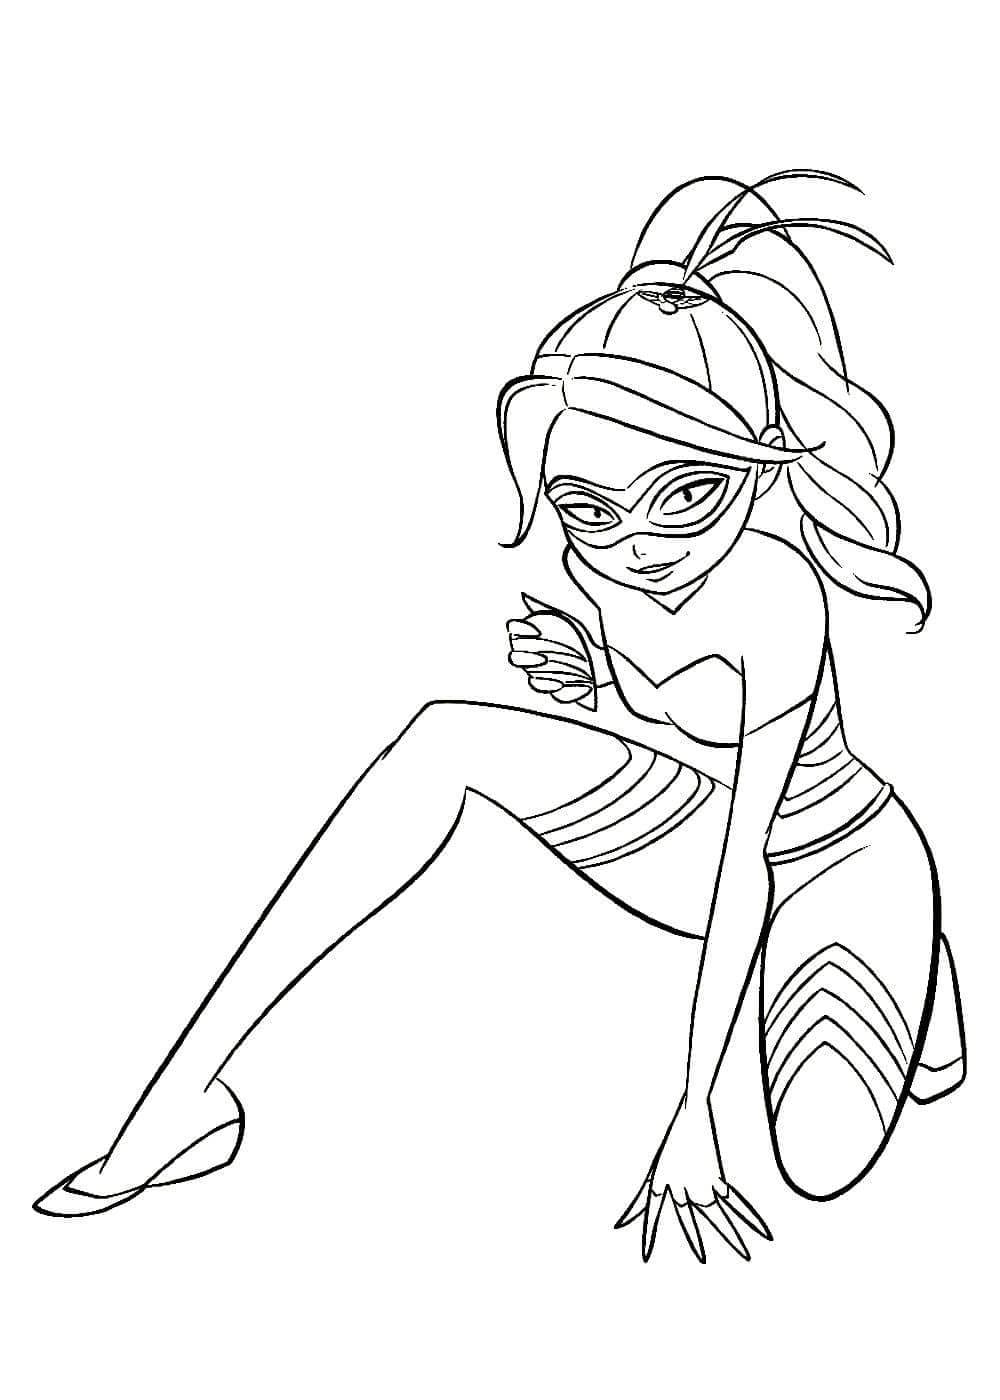 Ladybug And Cat Noir Kwami Coloring Pages - Coloring Pages Kwami